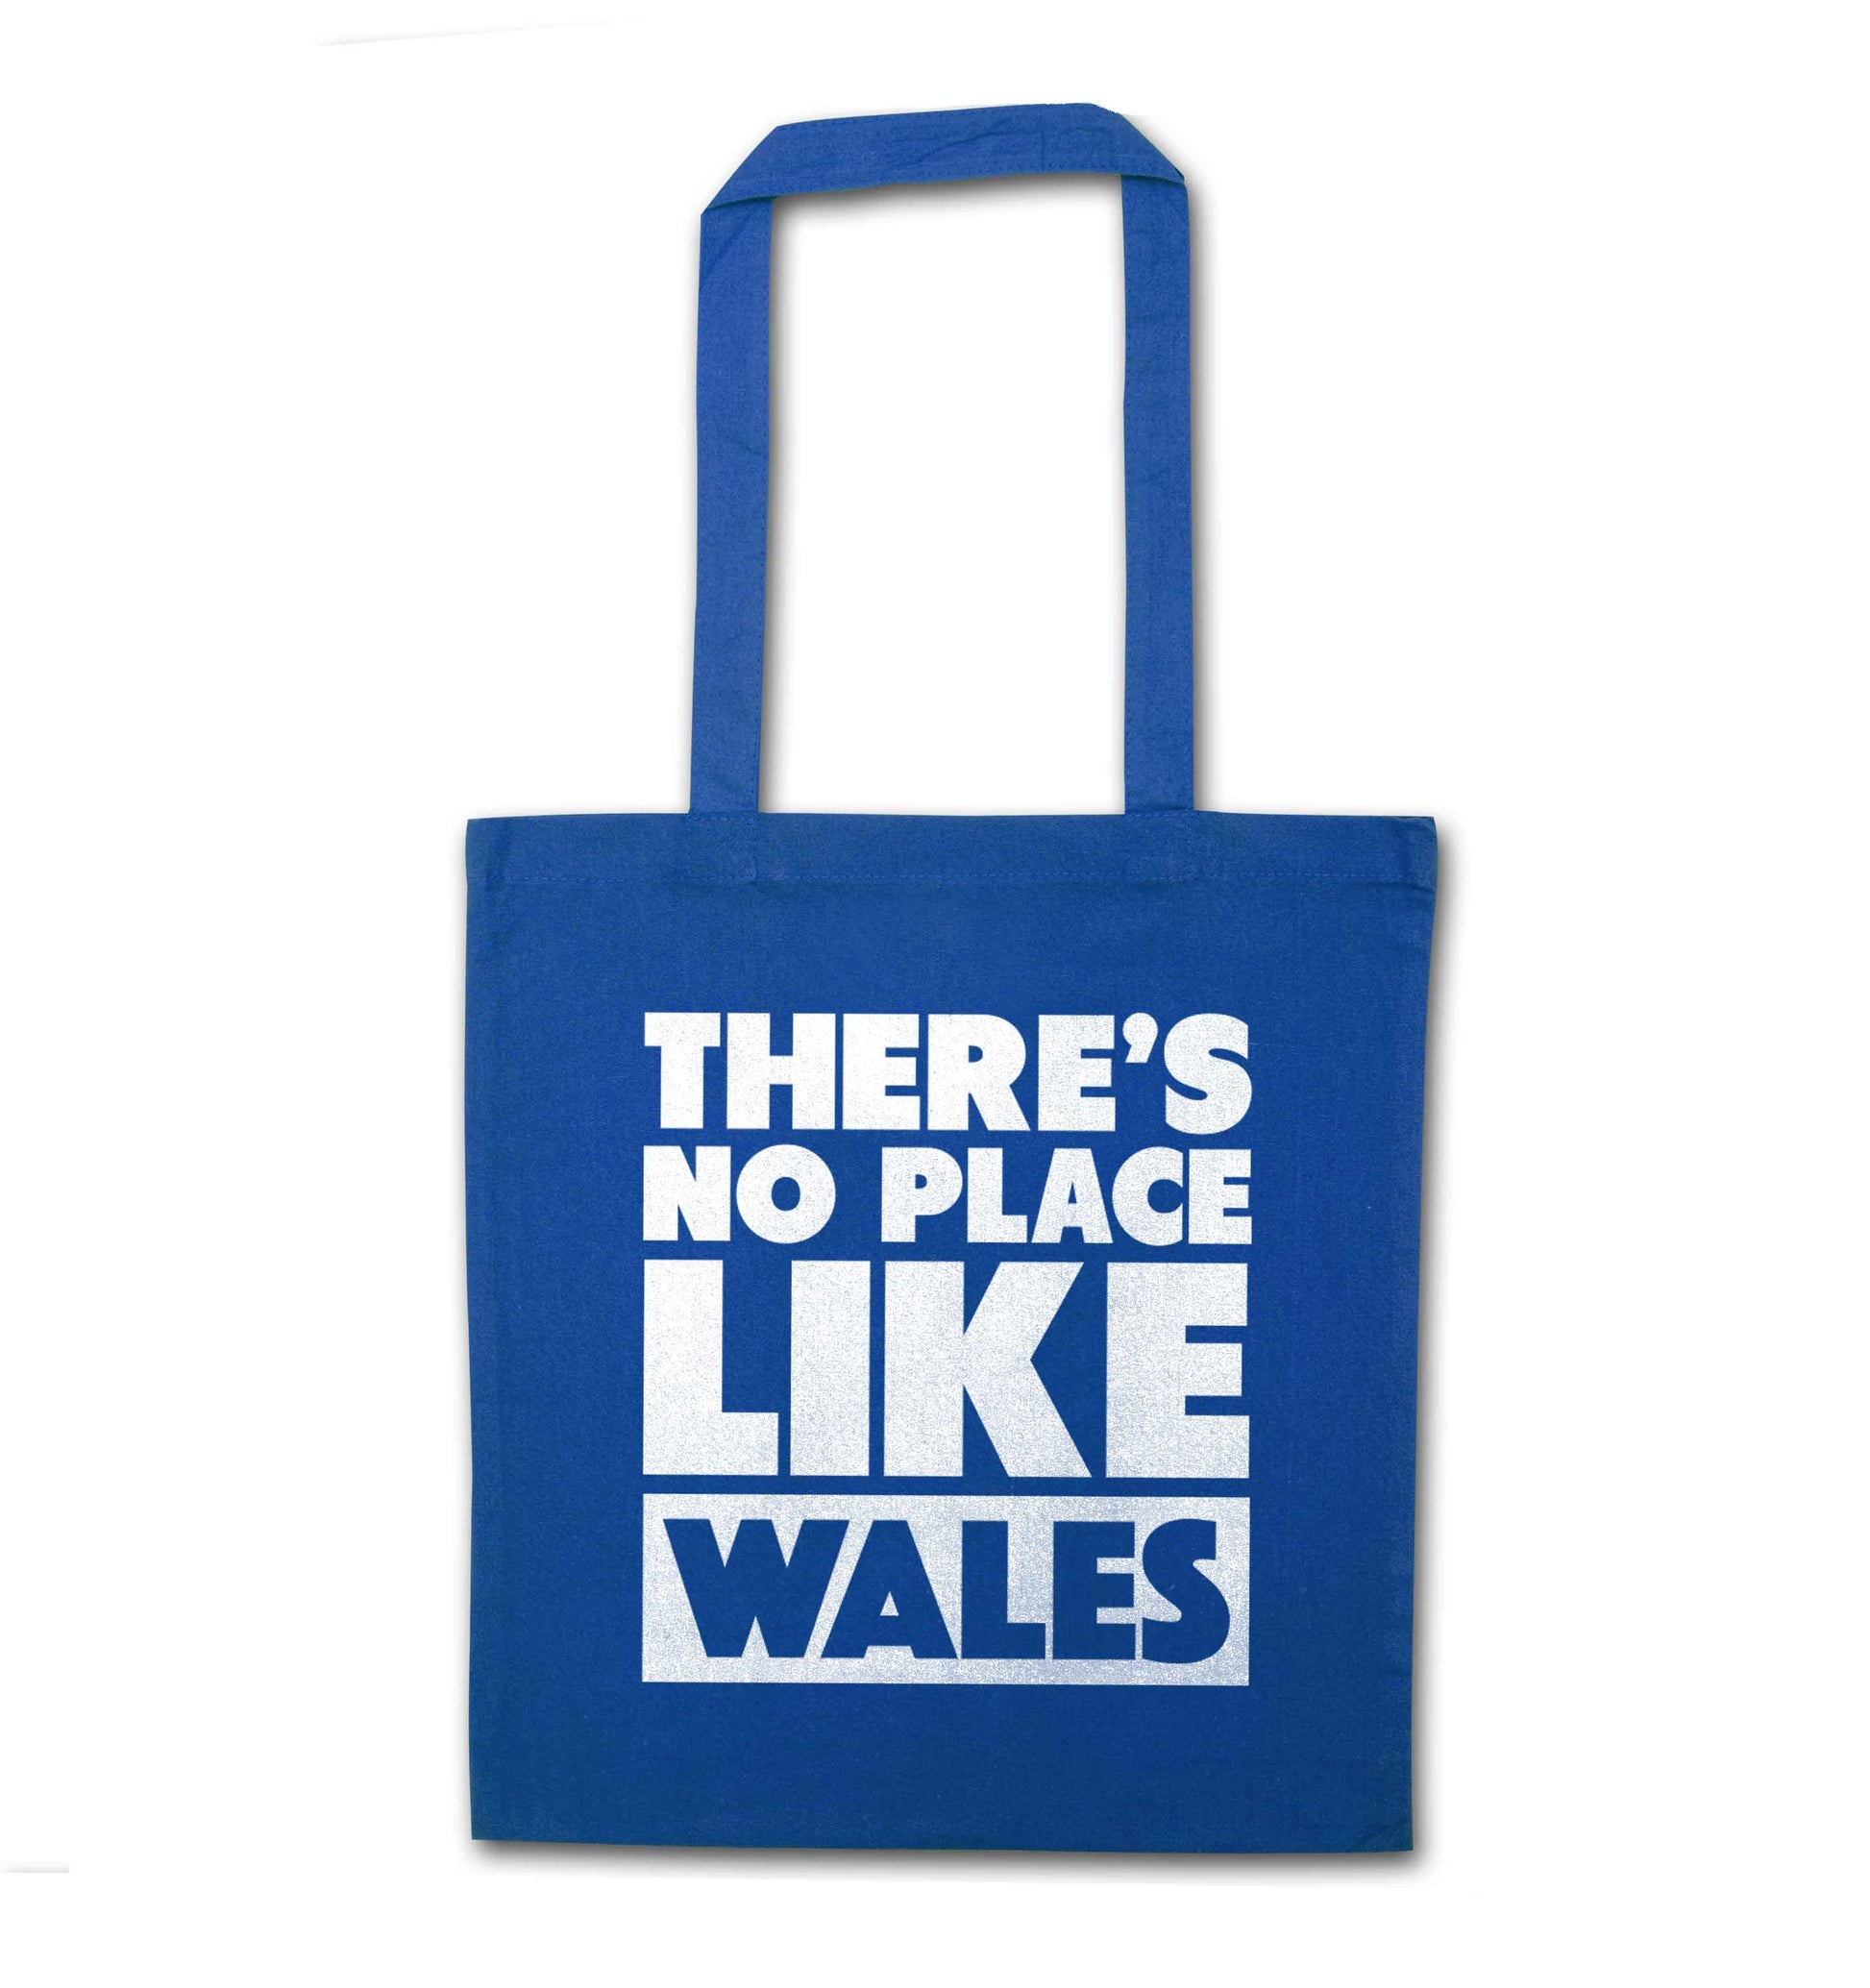 There's no place like Wales blue tote bag